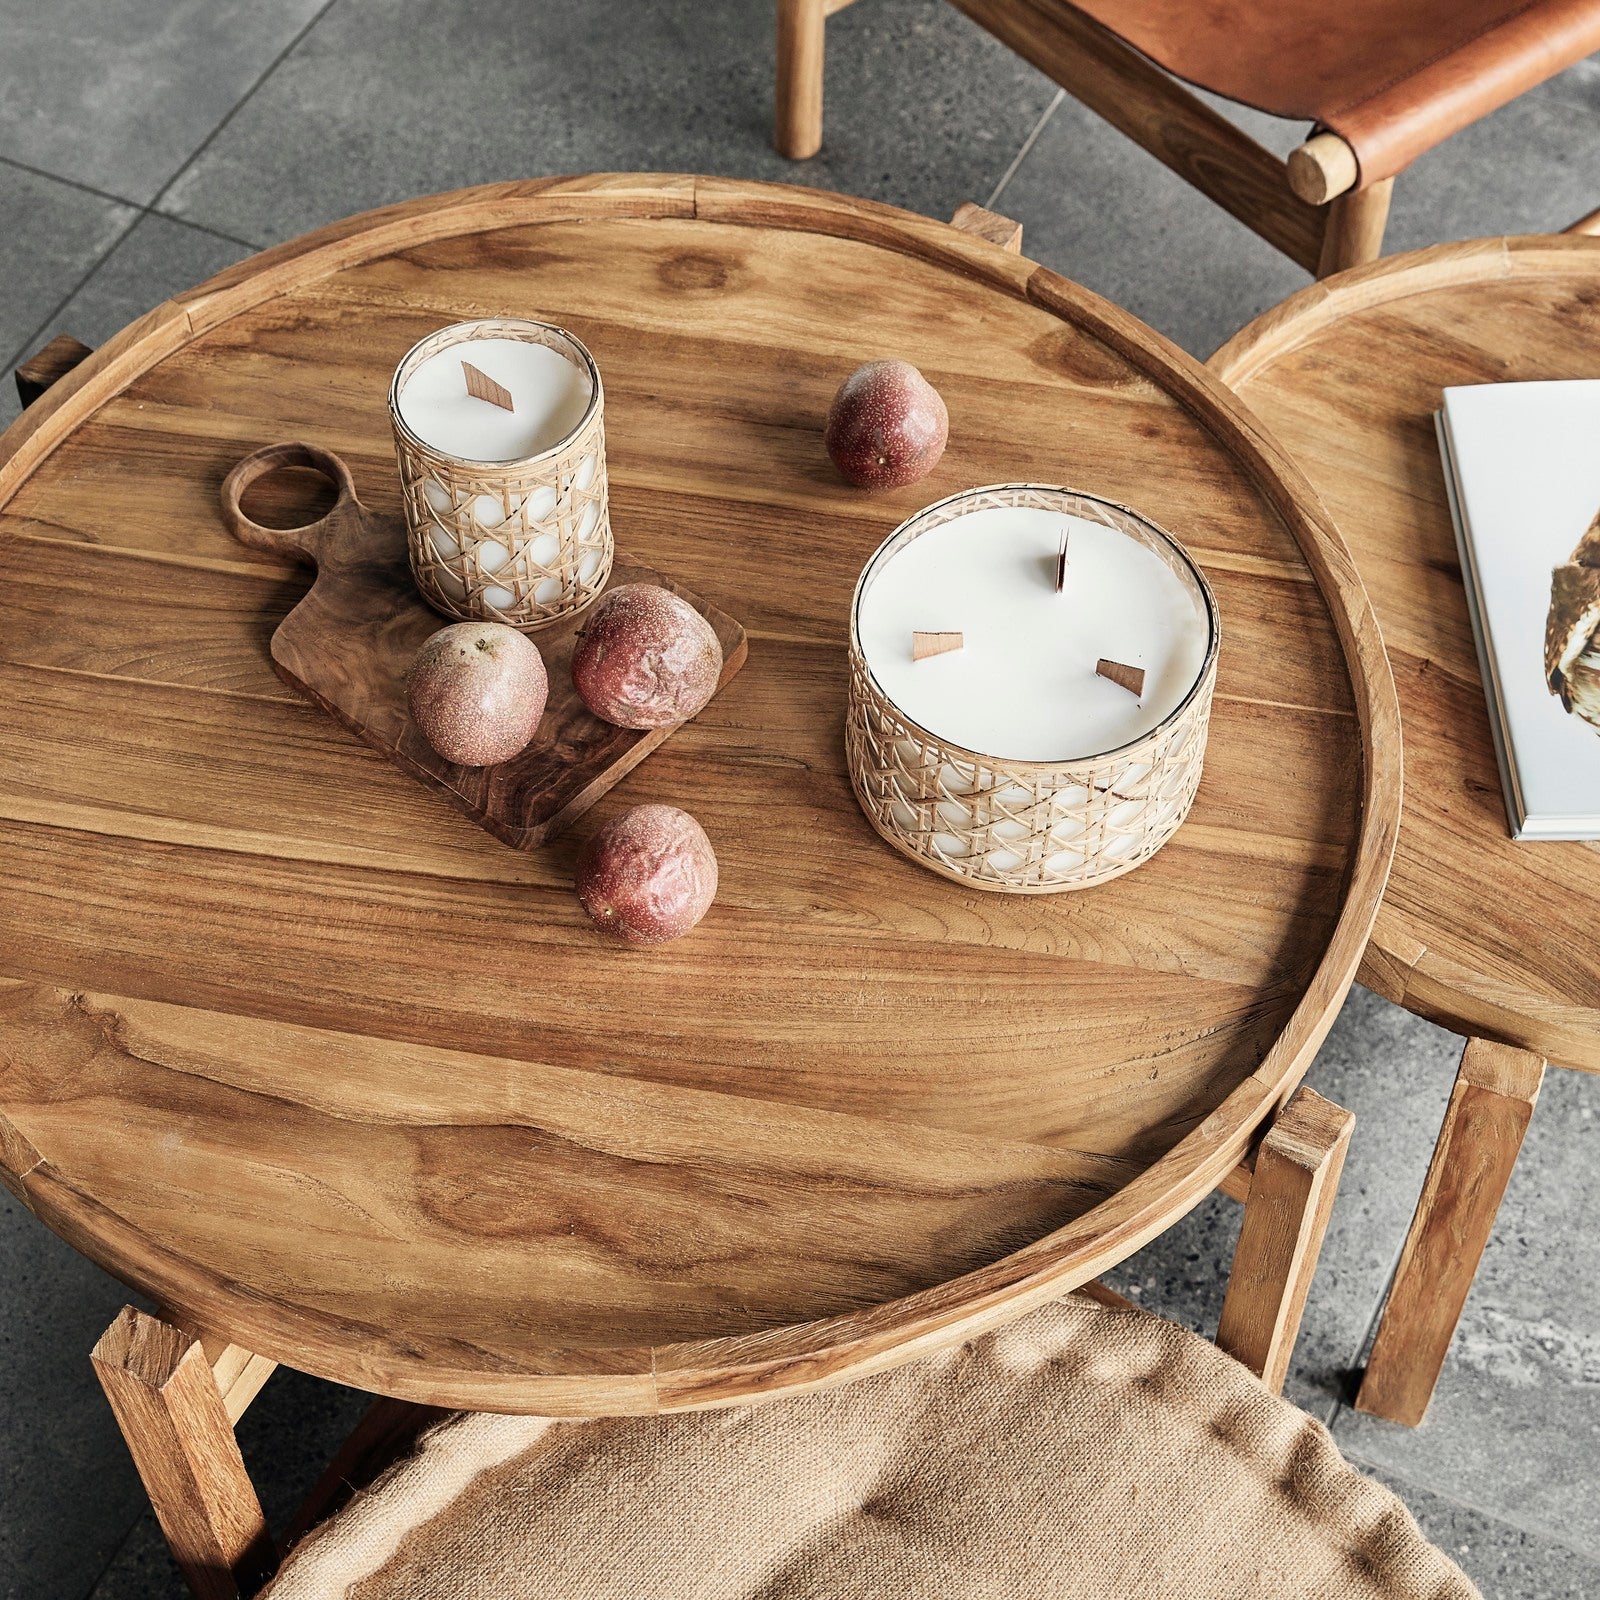 cyrus round coffee table large and small styled together with candles and passionfruit scattered on top